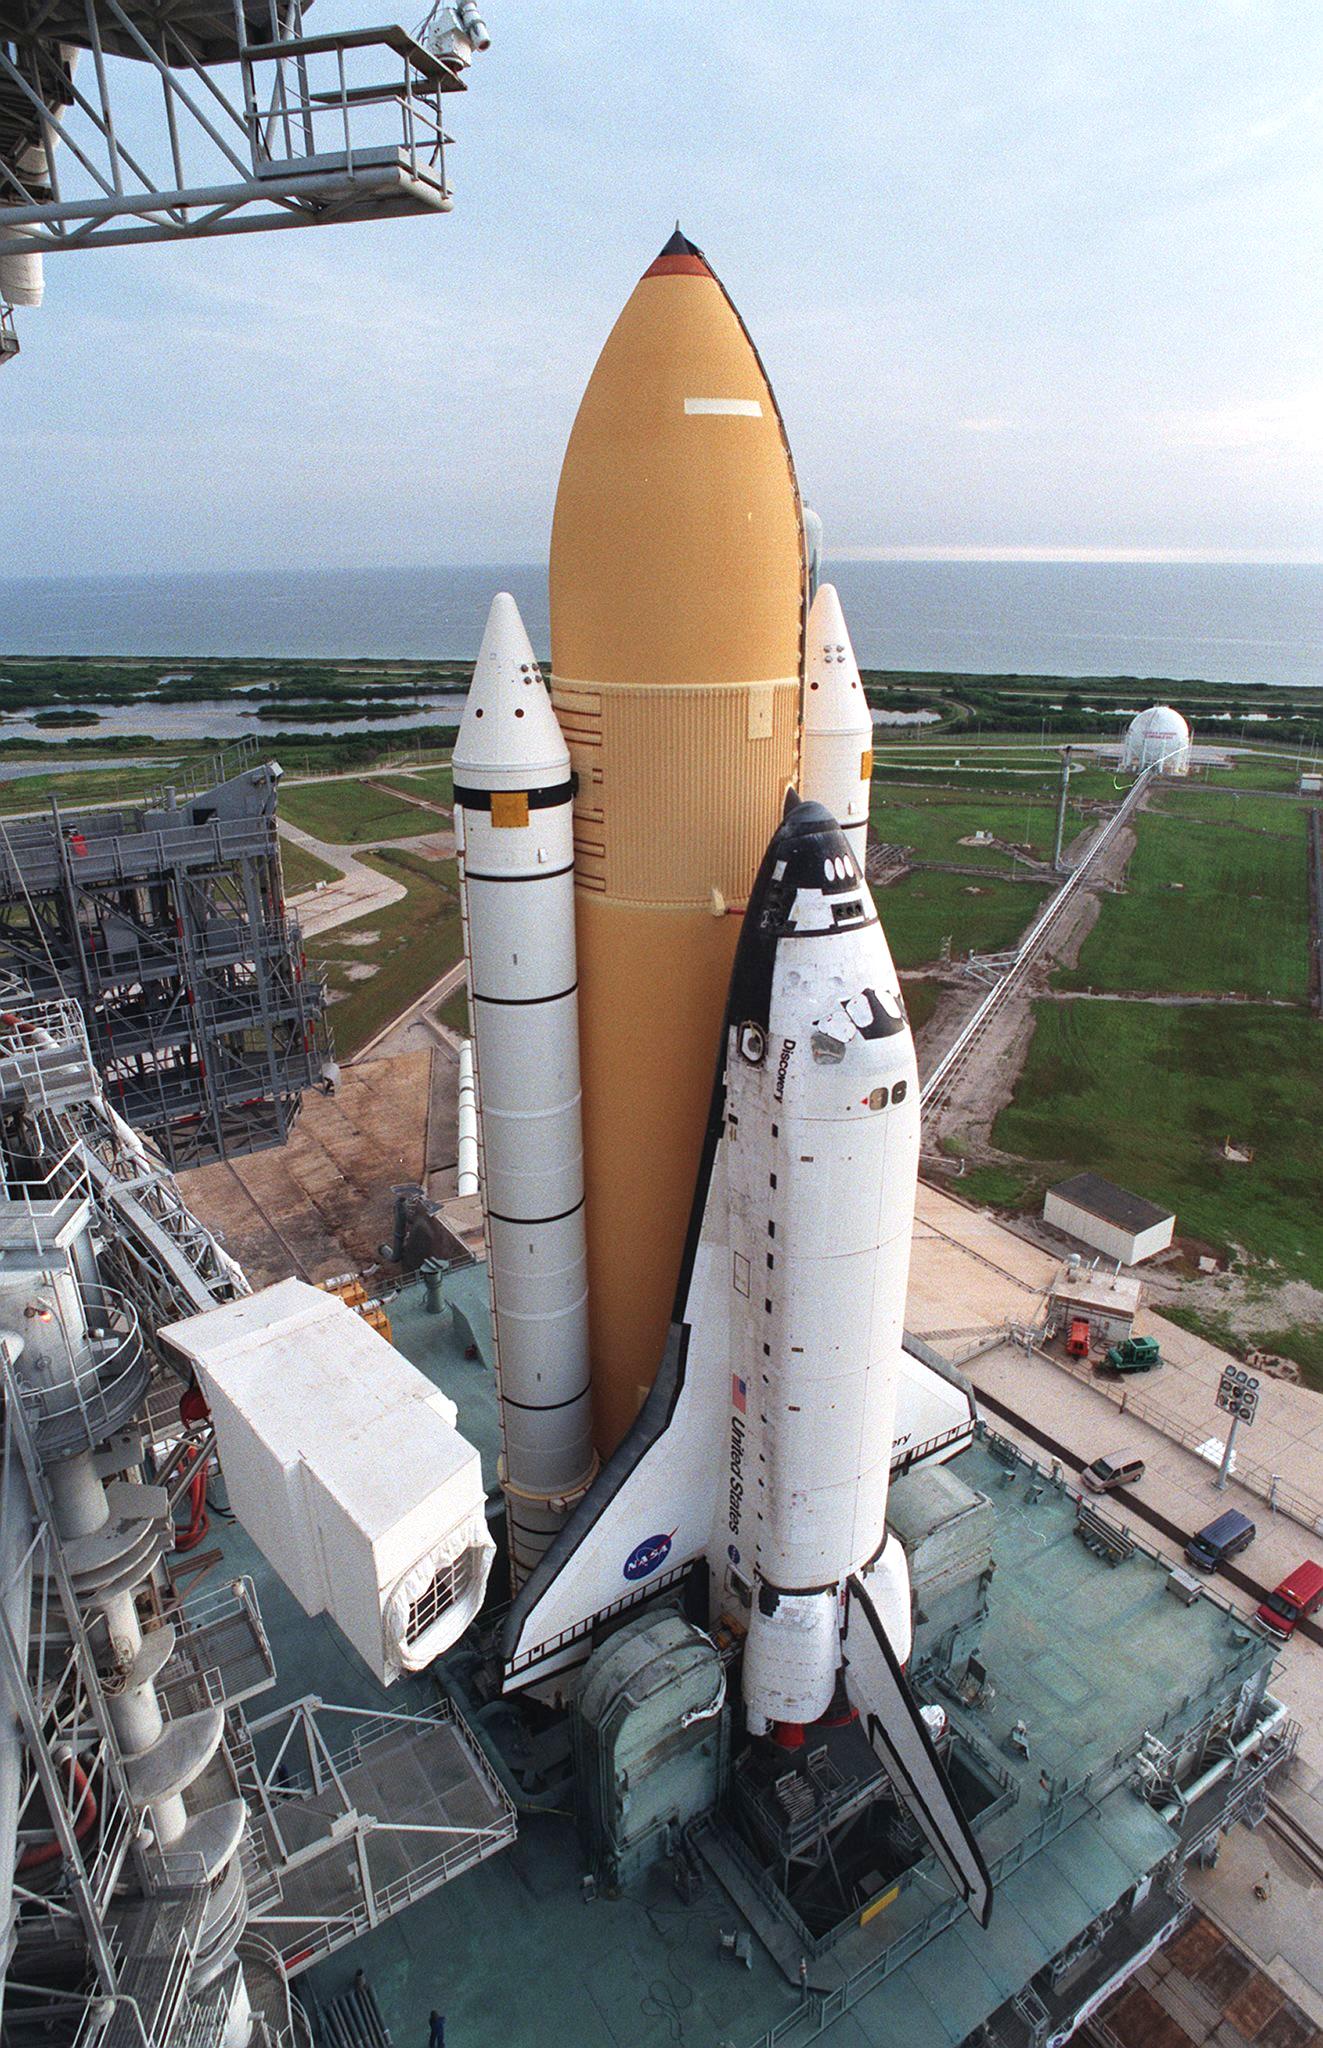 PHOTO: The US Space Shuttle Discovery is sits on launch pad 39-B at Kennedy Space Center, Florida, in preparation for its scheduled October 29 mission, Sept. 20, 1998.  
